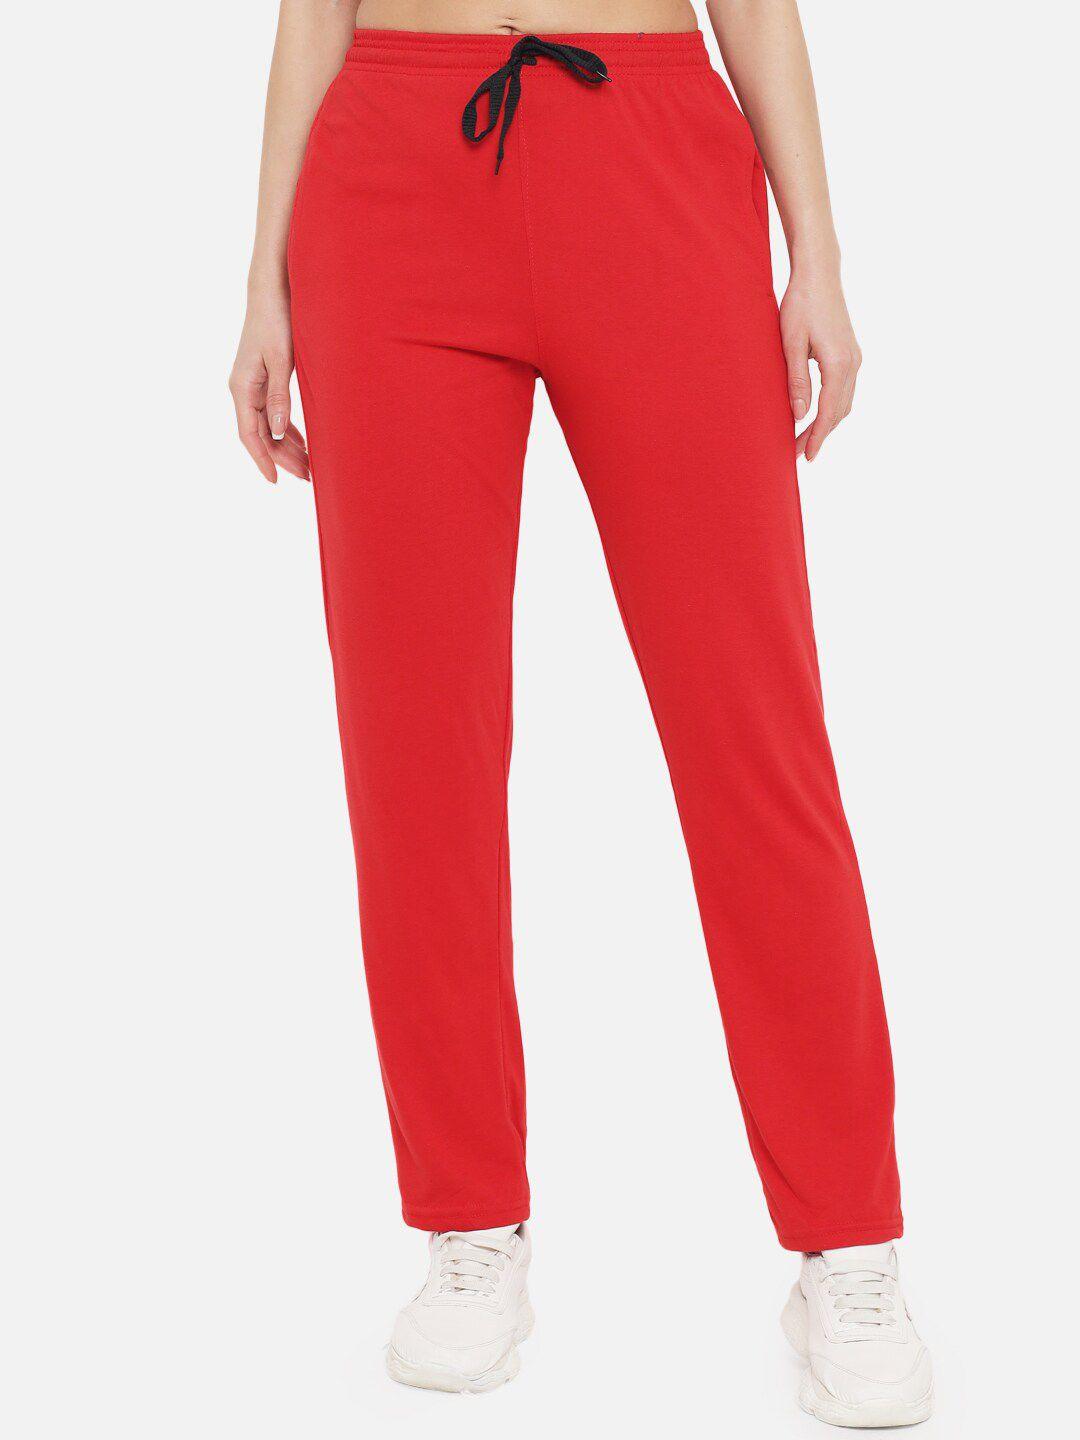 fflirtygo women red relaxed fit solid cotton track pants